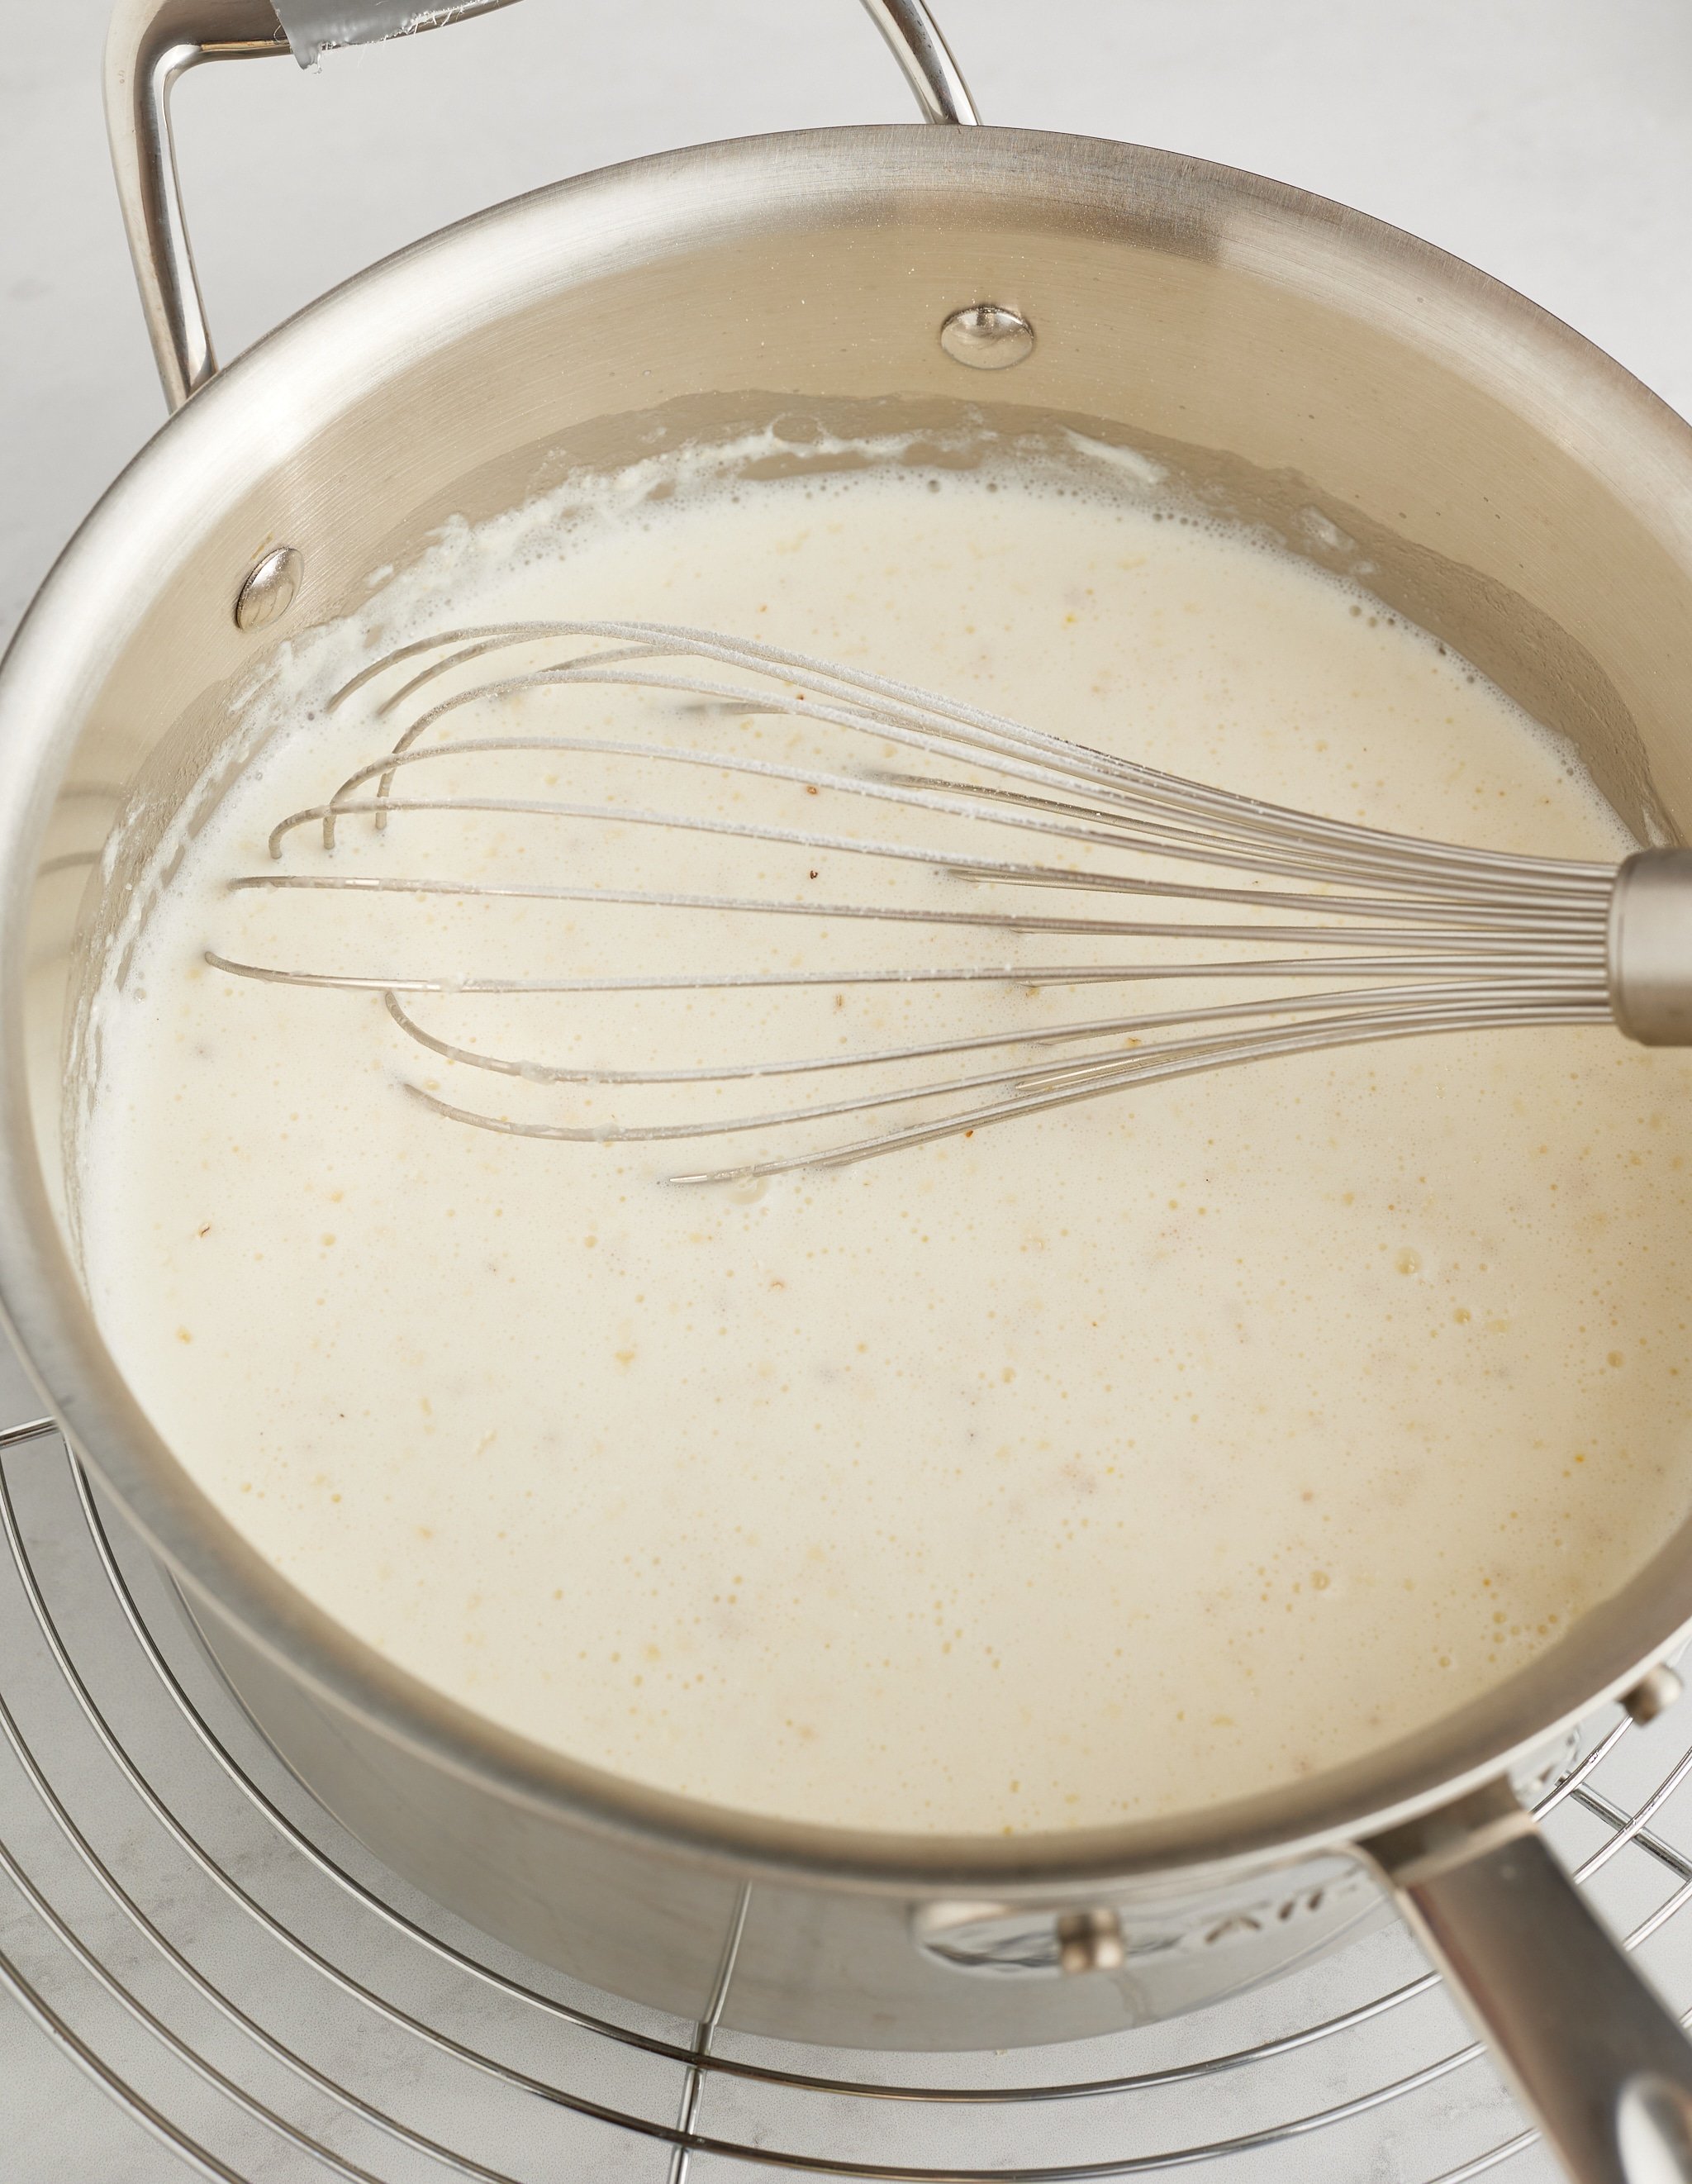 grits being cooked with whisk sticking in it